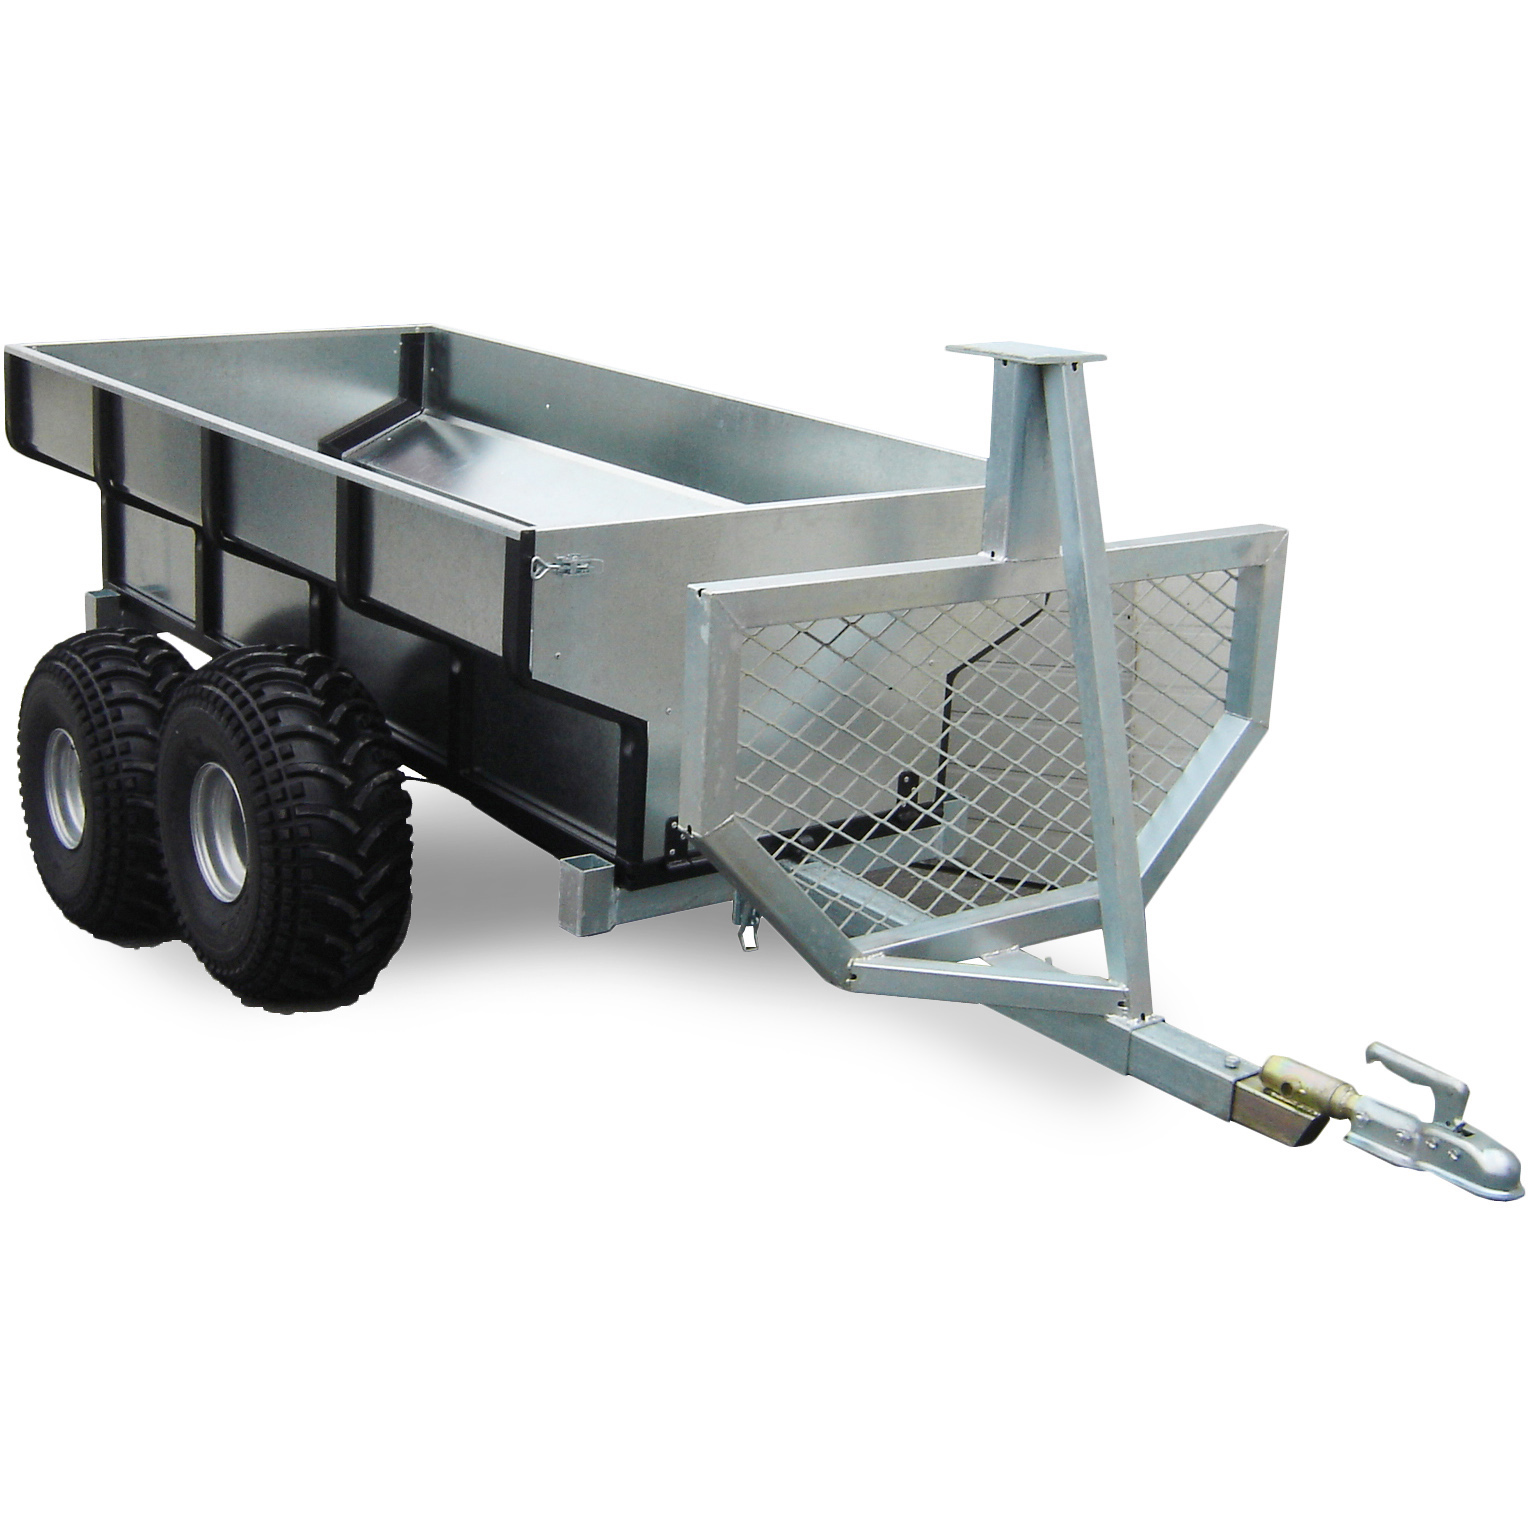 Atv trailer with box - Webshop Trailers - RE Motors